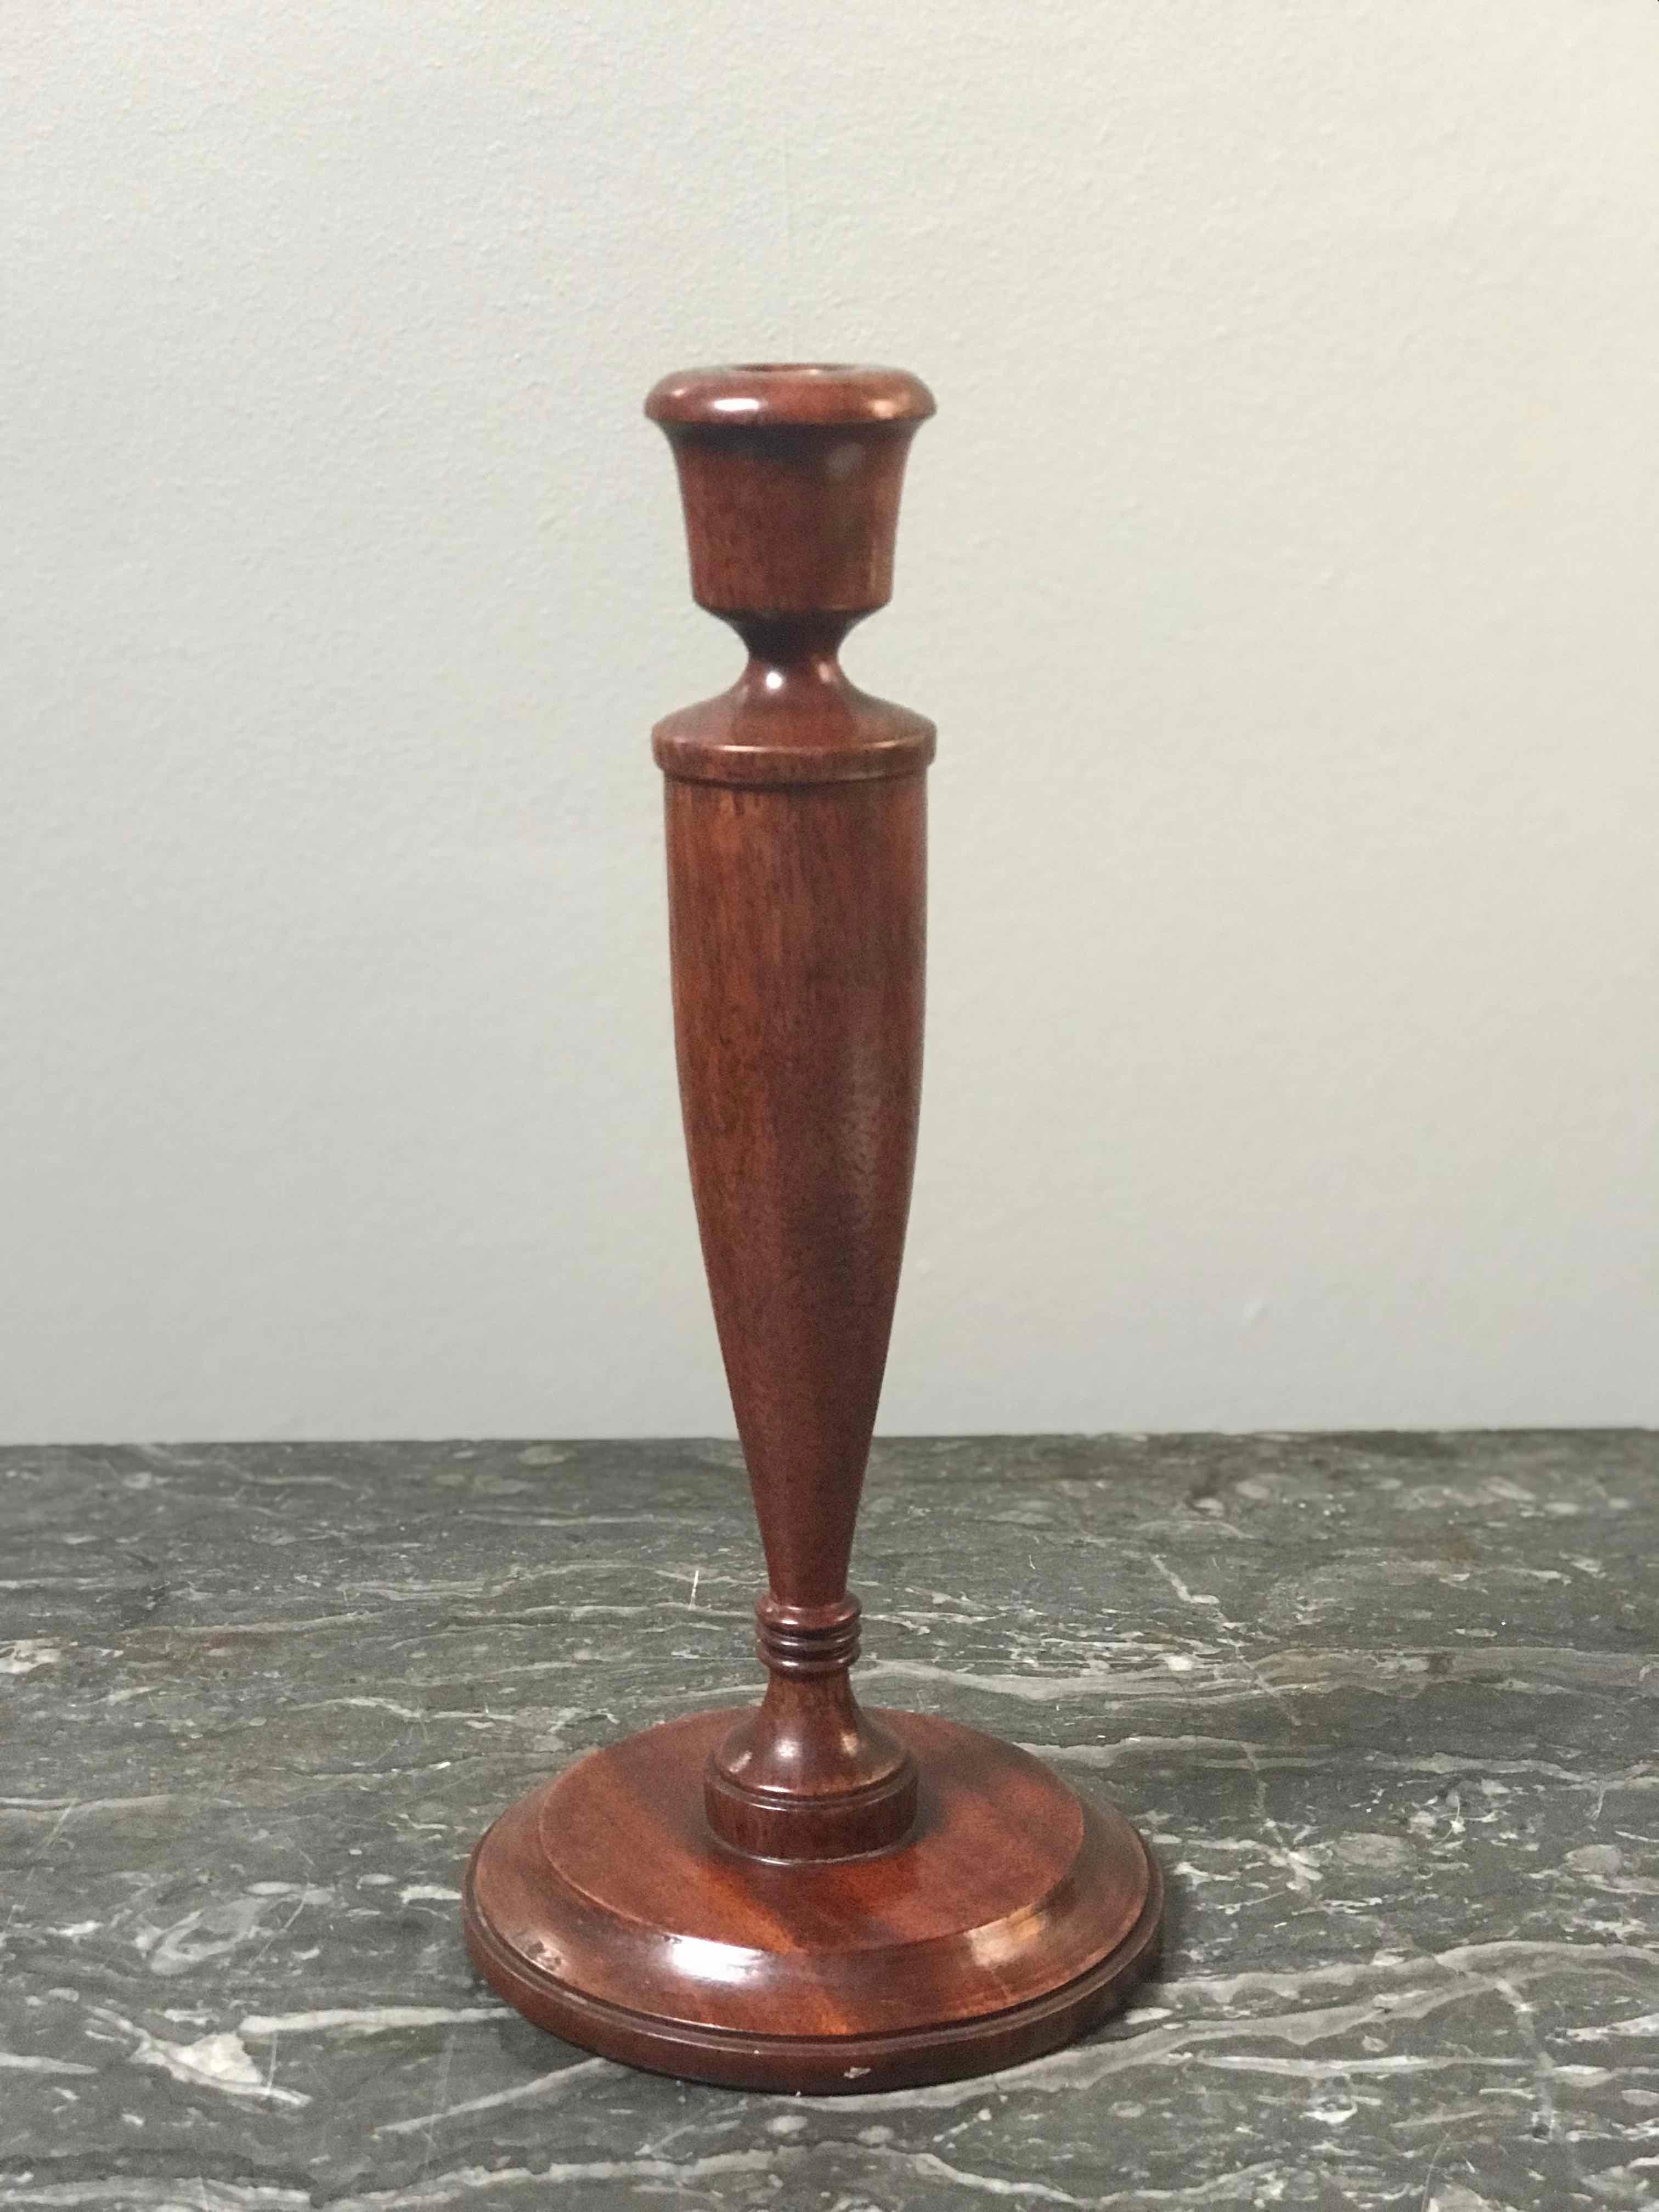 A pair of turned candlesticks in mahogany.